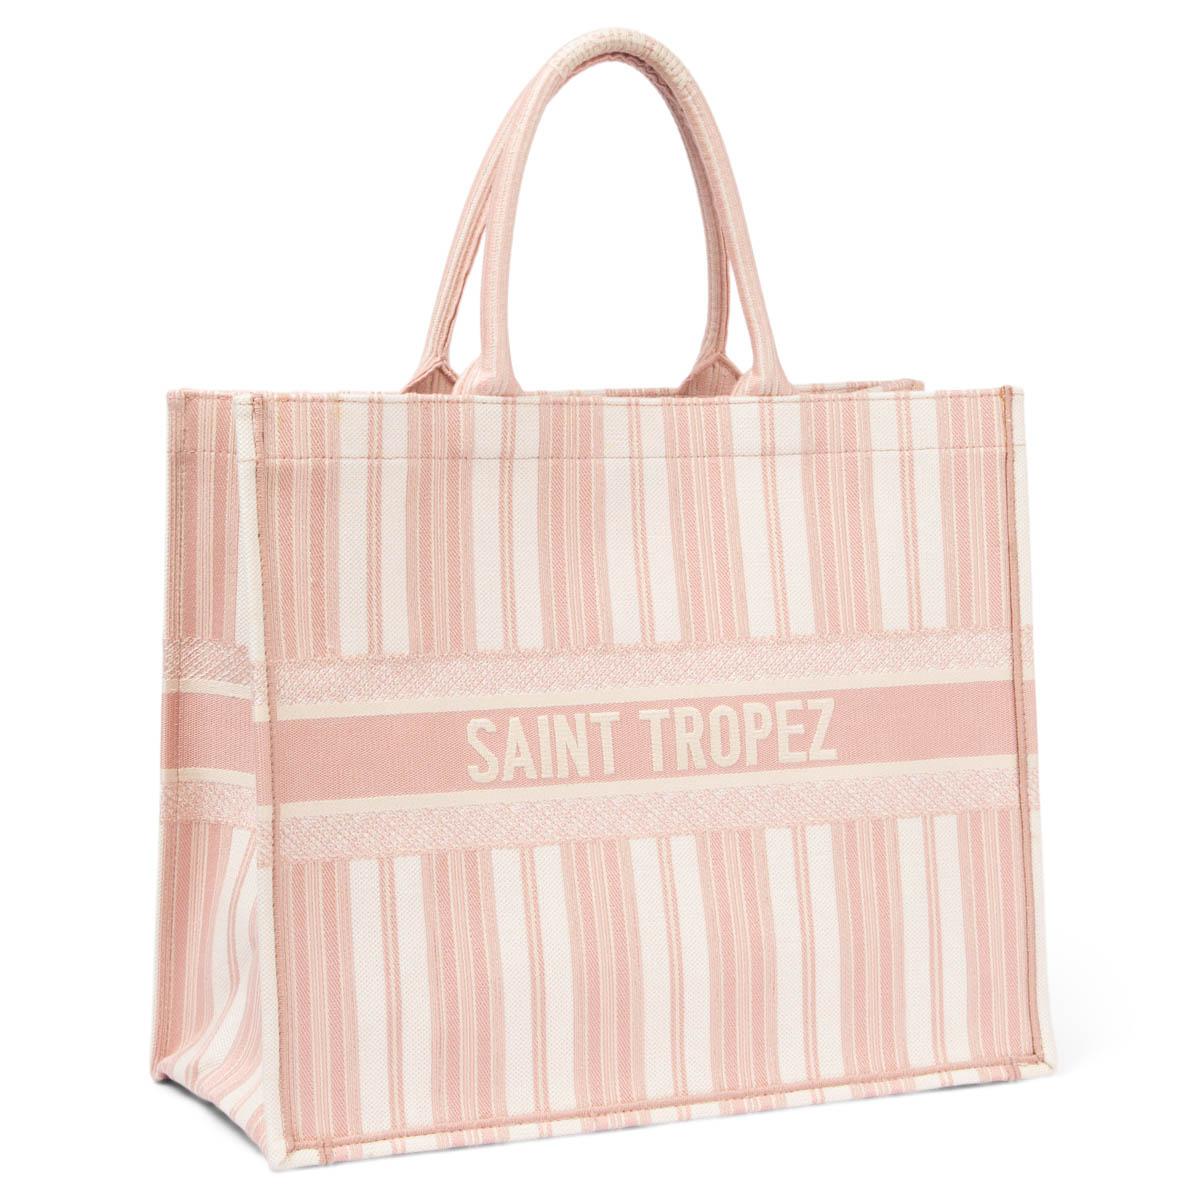 100% authentic Christian Dior 2019 Dioriviera Saint Tropez Large Book Tote in blush pink and off-white. Unlined. Brand new. 

Measurements
Height	35cm (13.7in)
Width	42cm (16.4in)
Depth	18cm (7in)
Drop of the Handle	17cm